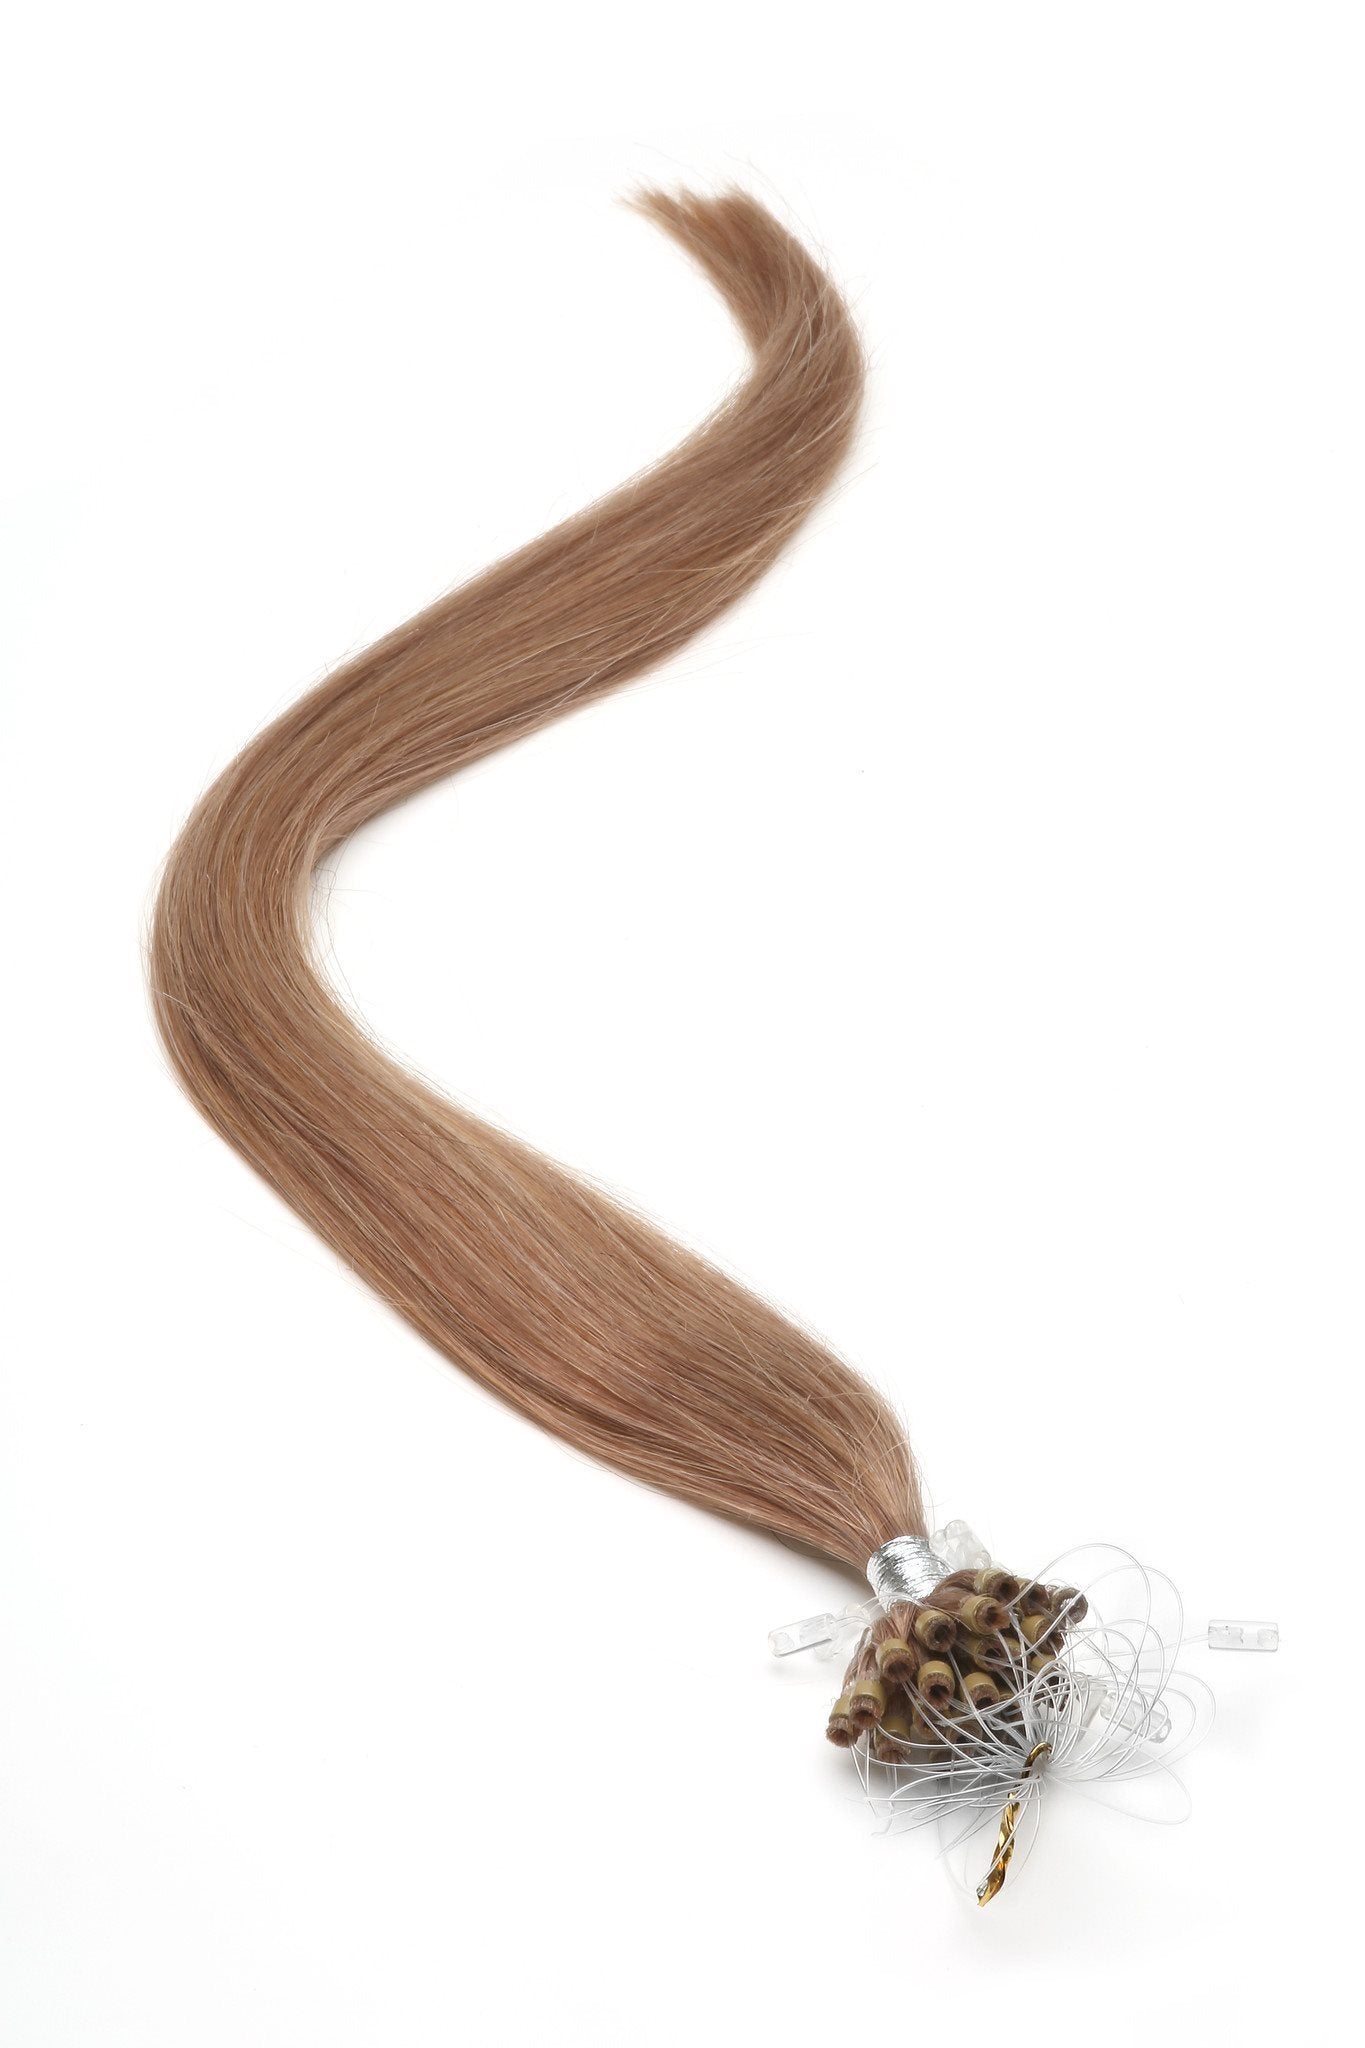 Micro Ring Hair Extensions | 18 inch Light Brown (10) - Beauty Hair Products LtdHair Extensions